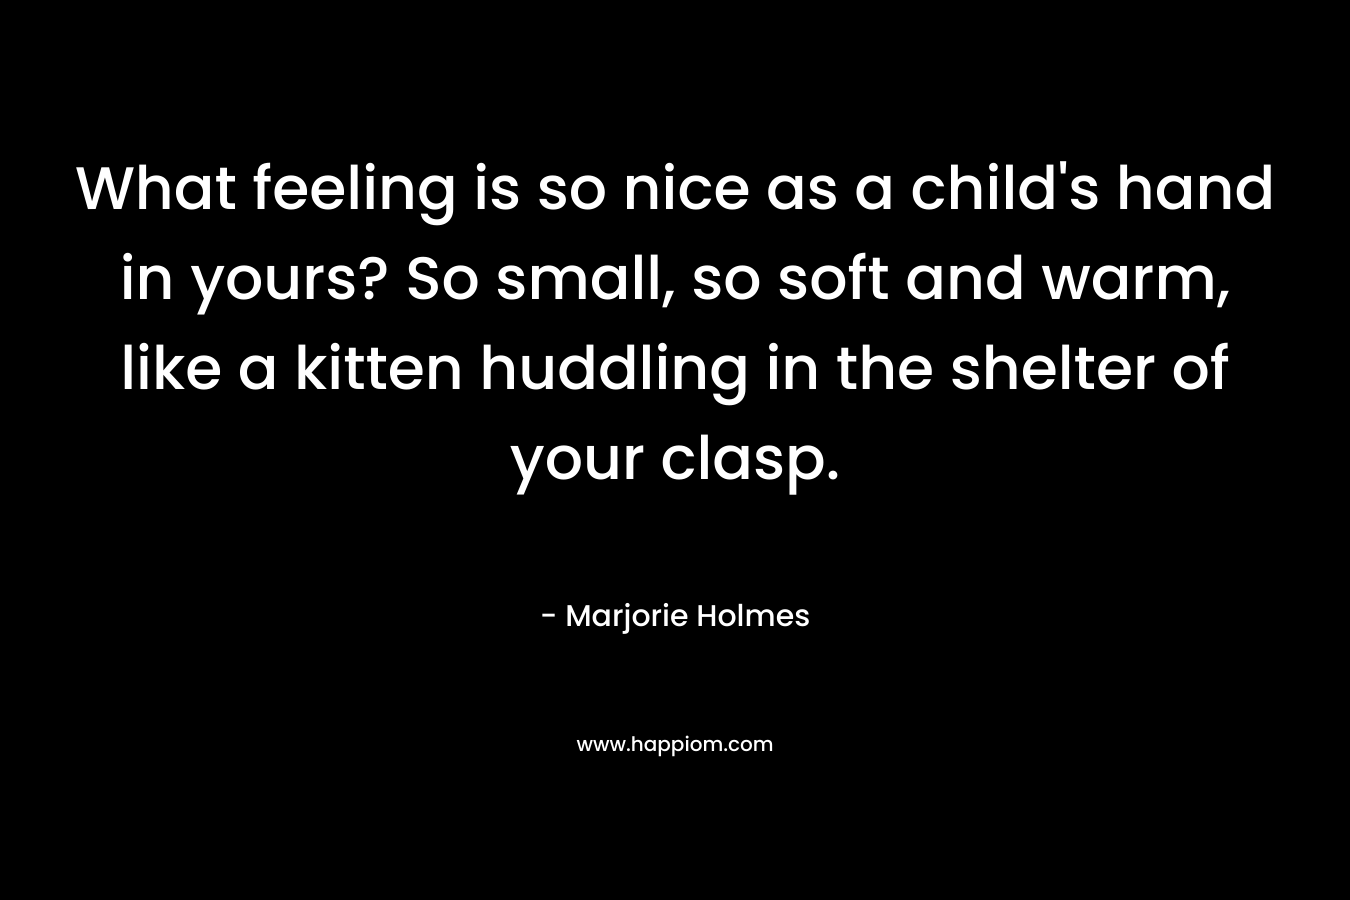 What feeling is so nice as a child's hand in yours? So small, so soft and warm, like a kitten huddling in the shelter of your clasp.